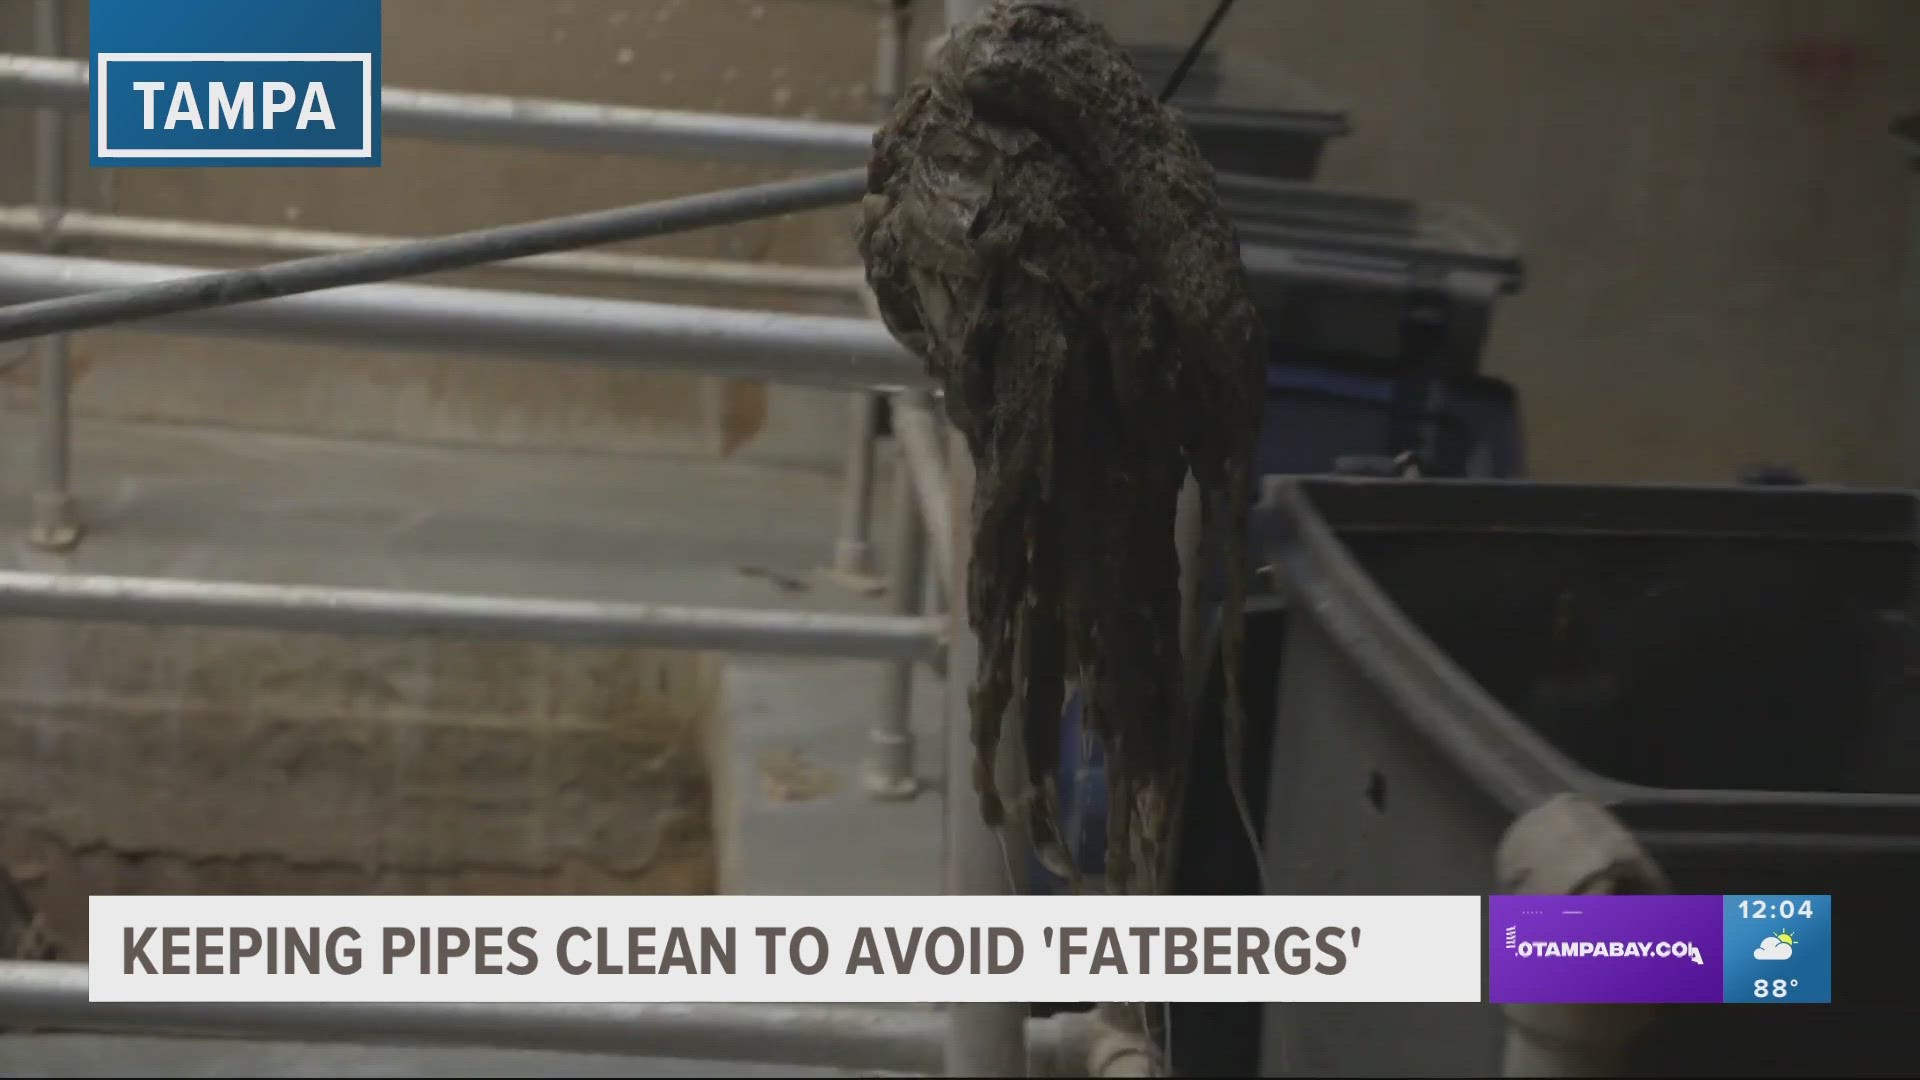 The city of Tampa is urging residents to keep their drains clear of oil, cooking fats and grease to help prevent "fatbergs" from clogging pipes.